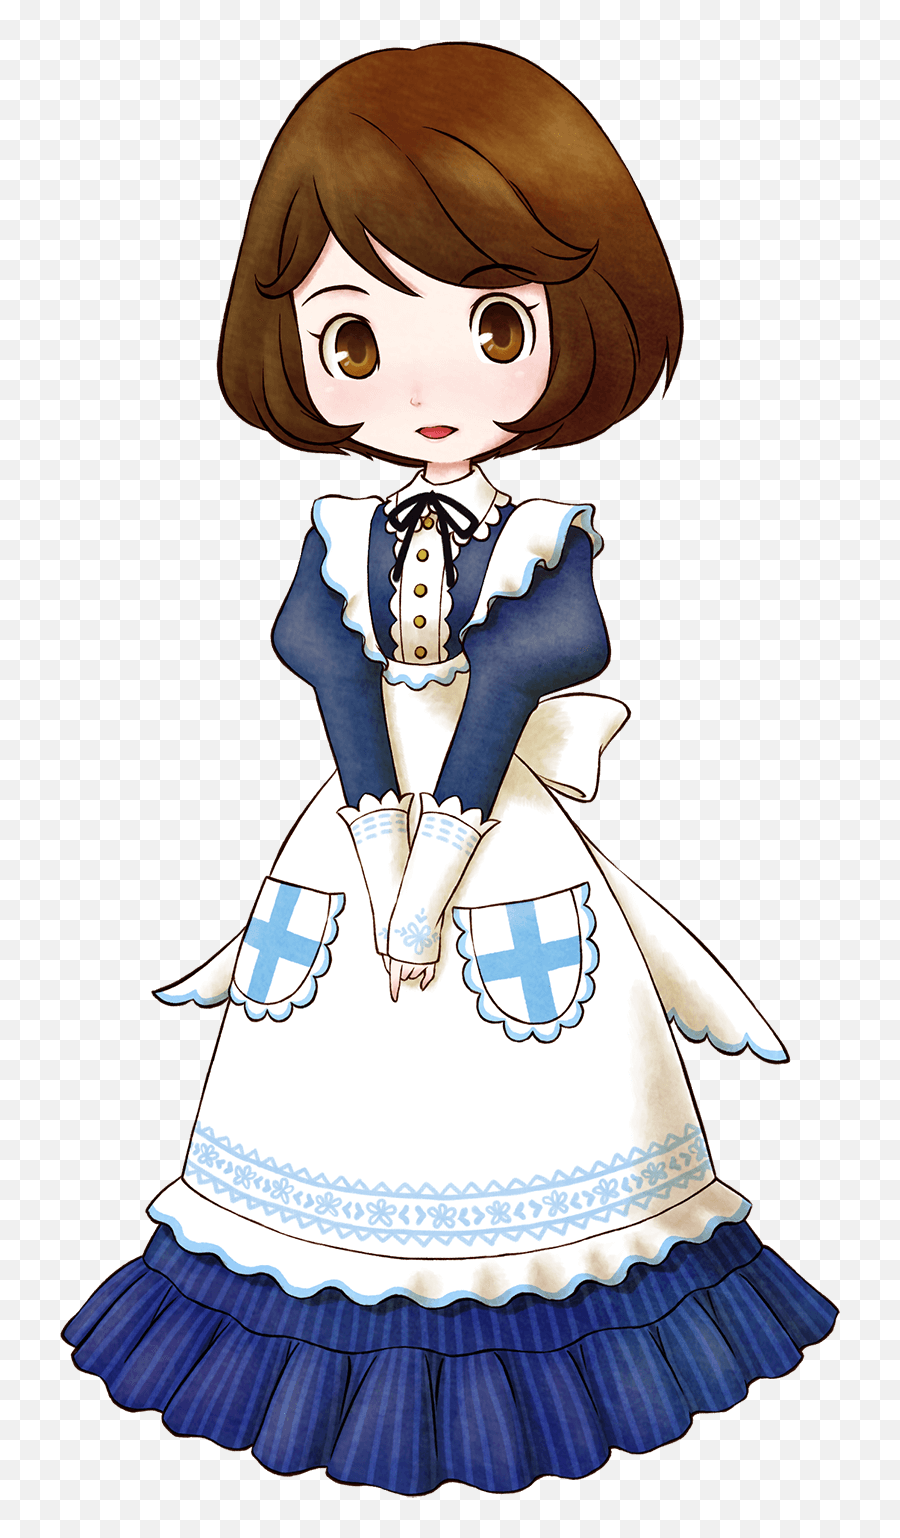 Elly - Story Of Seasons Friends Of Mineral Town Elly Emoji,Story Of Seasons Emotions